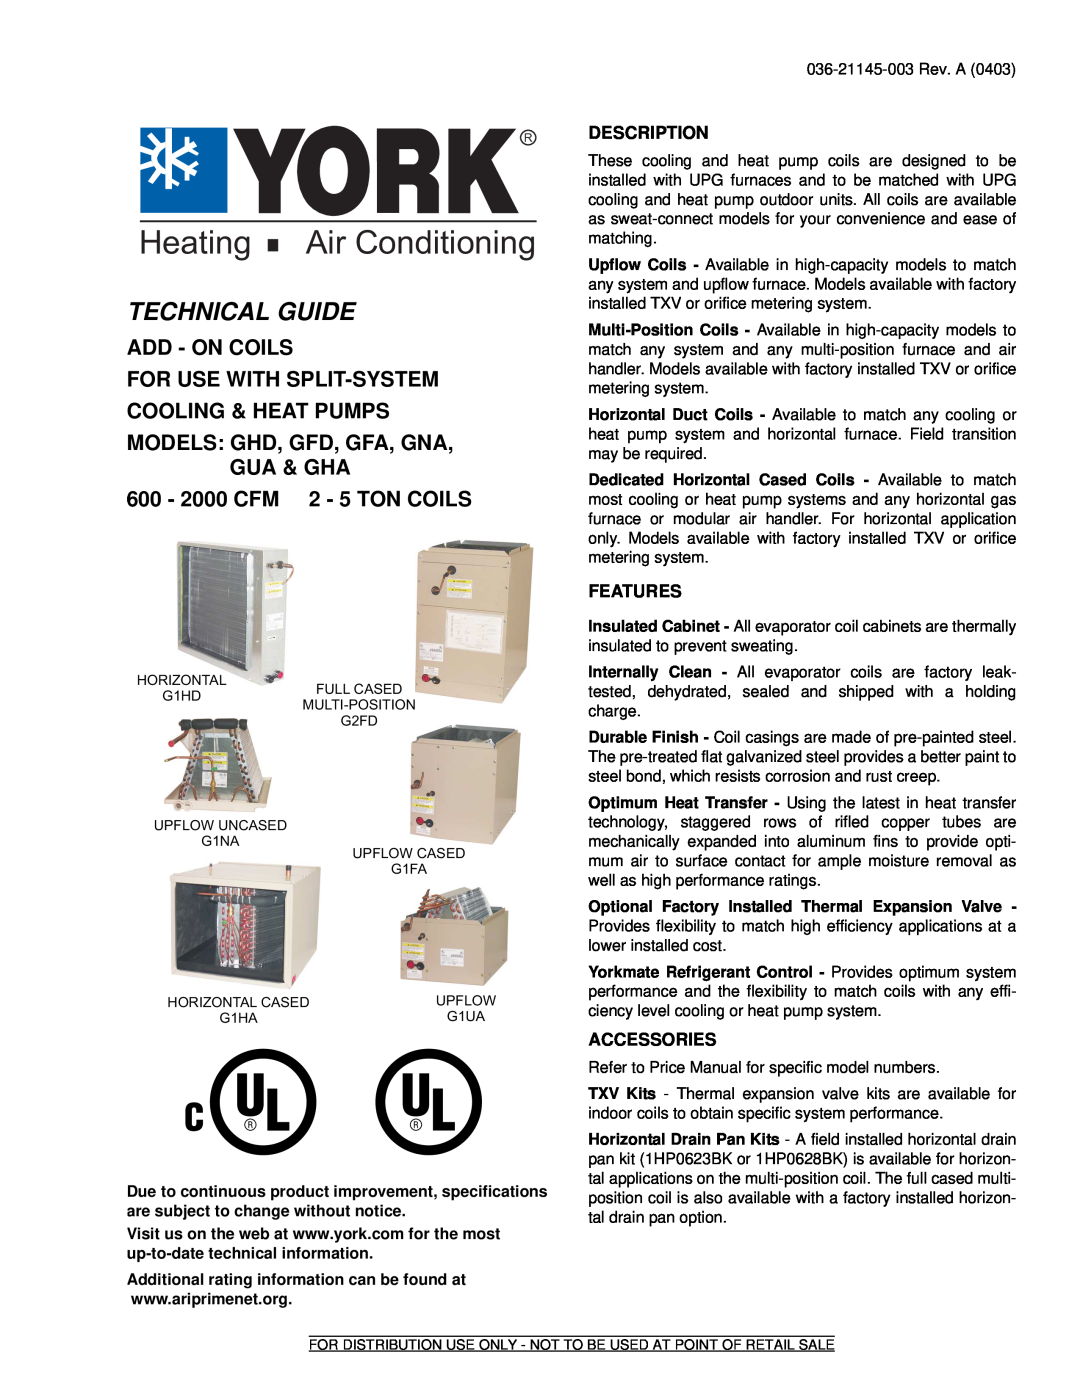 York GFD, GHA specifications Description, Features, Accessories, Heating Air Conditioning, Technical Guide, Add - On Coils 